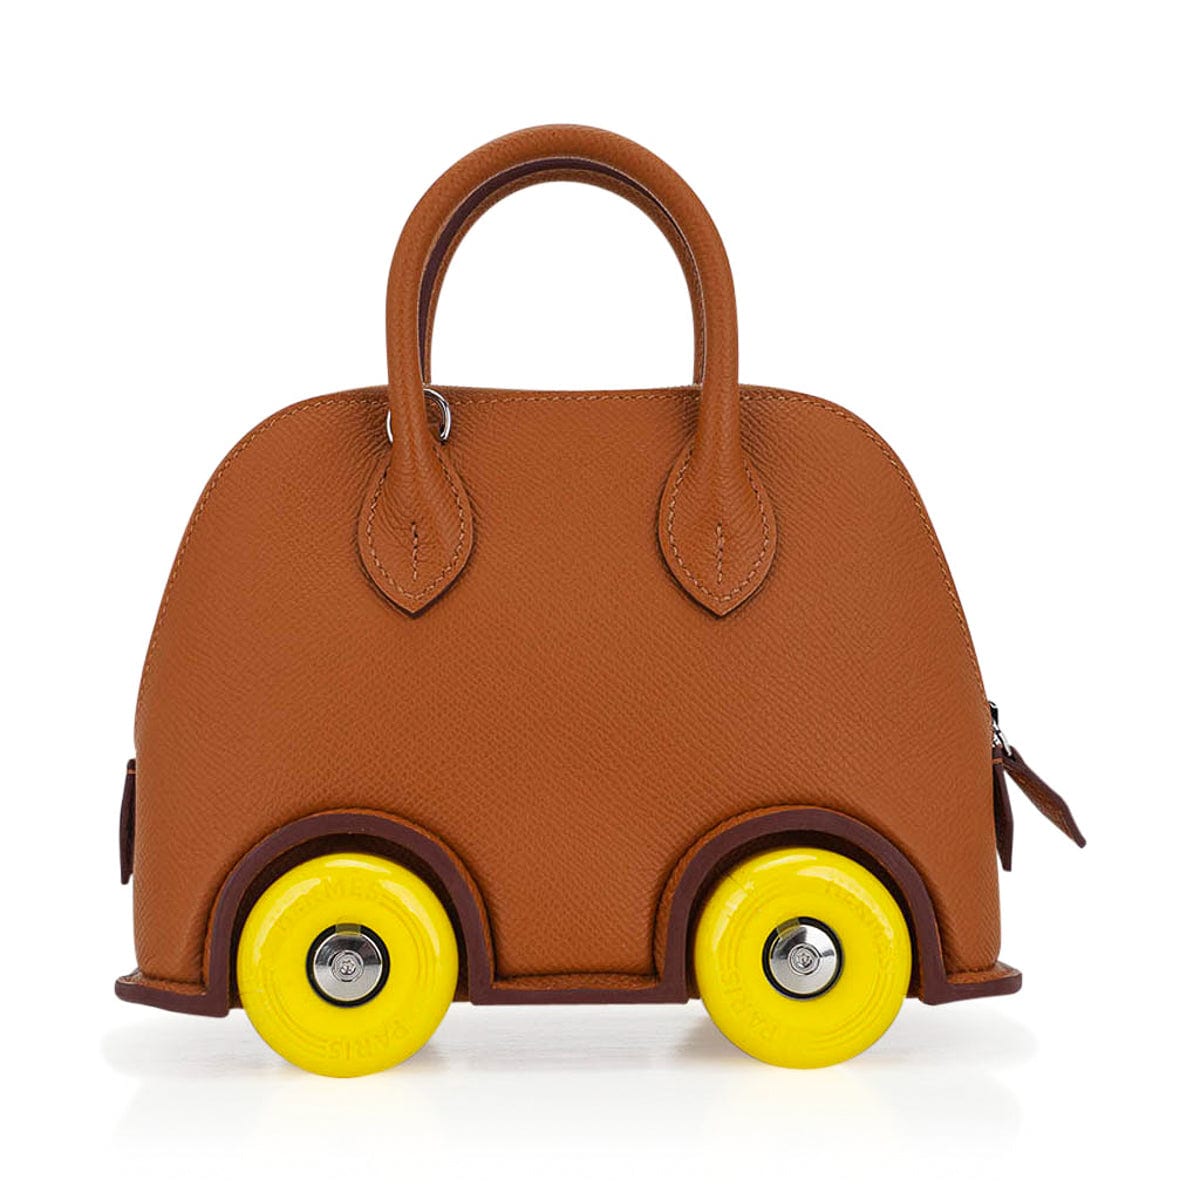 Hermes Limited Edition Mini Bolide 1923 Bag On Wheels in Gold Togo Leather  and Palladium Hardware